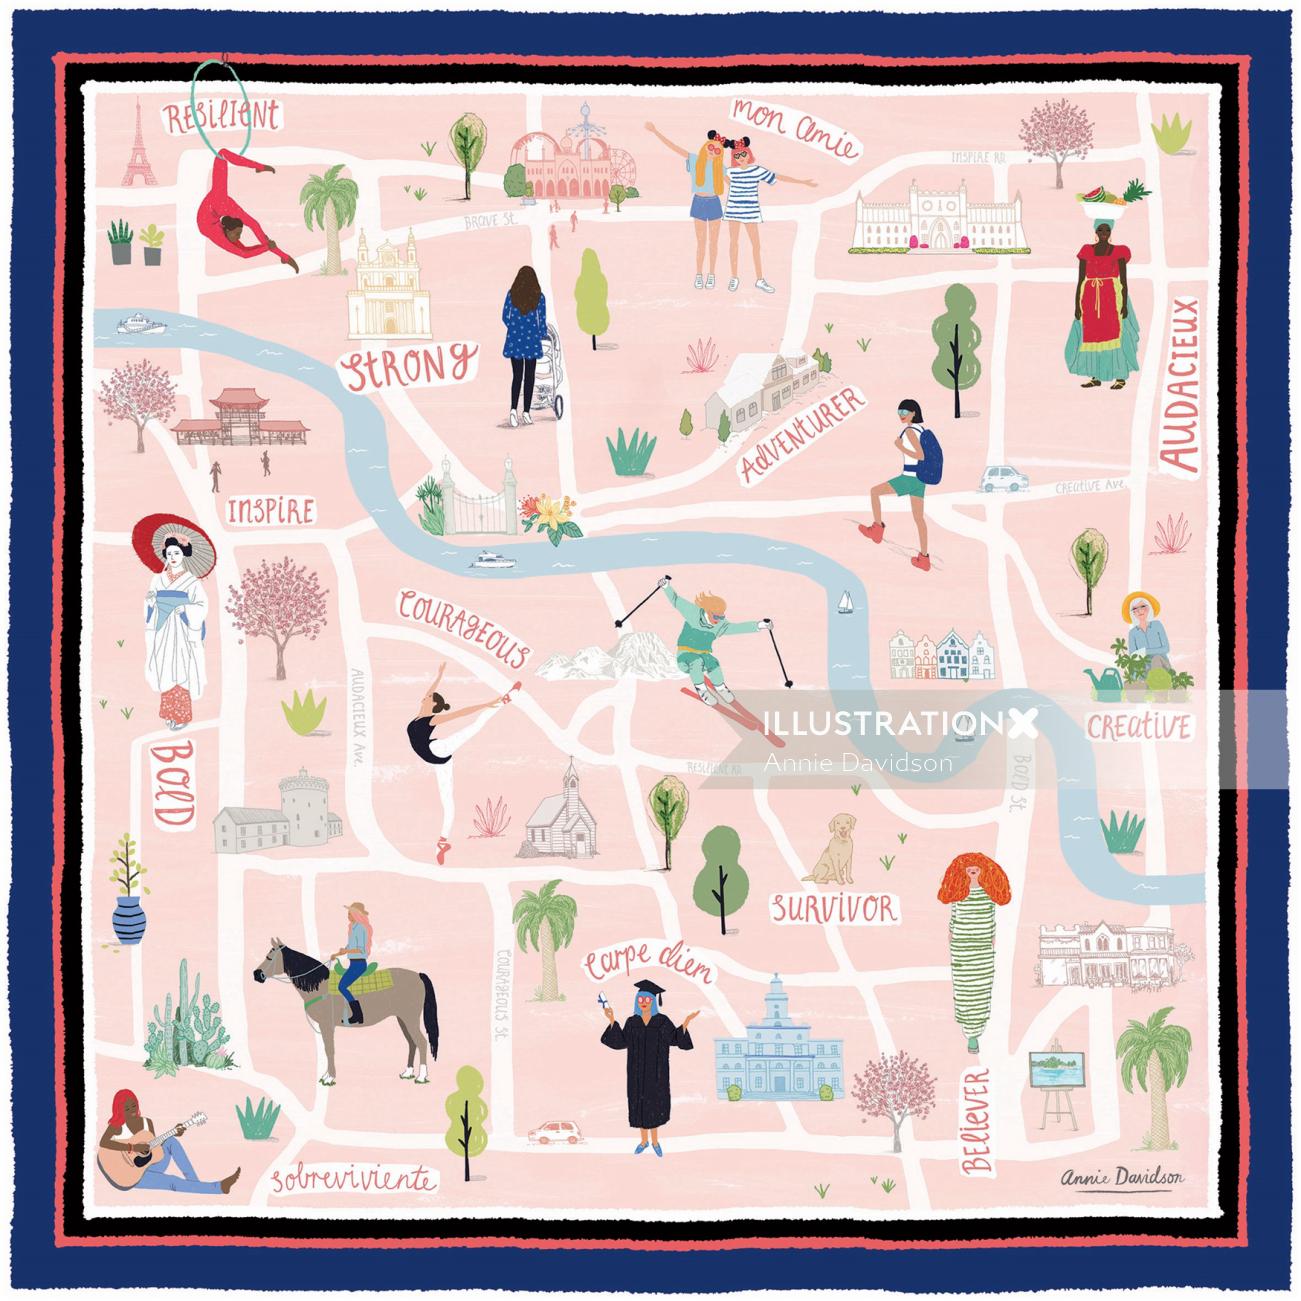 Map illustration on Silk Scarf for Talbot's